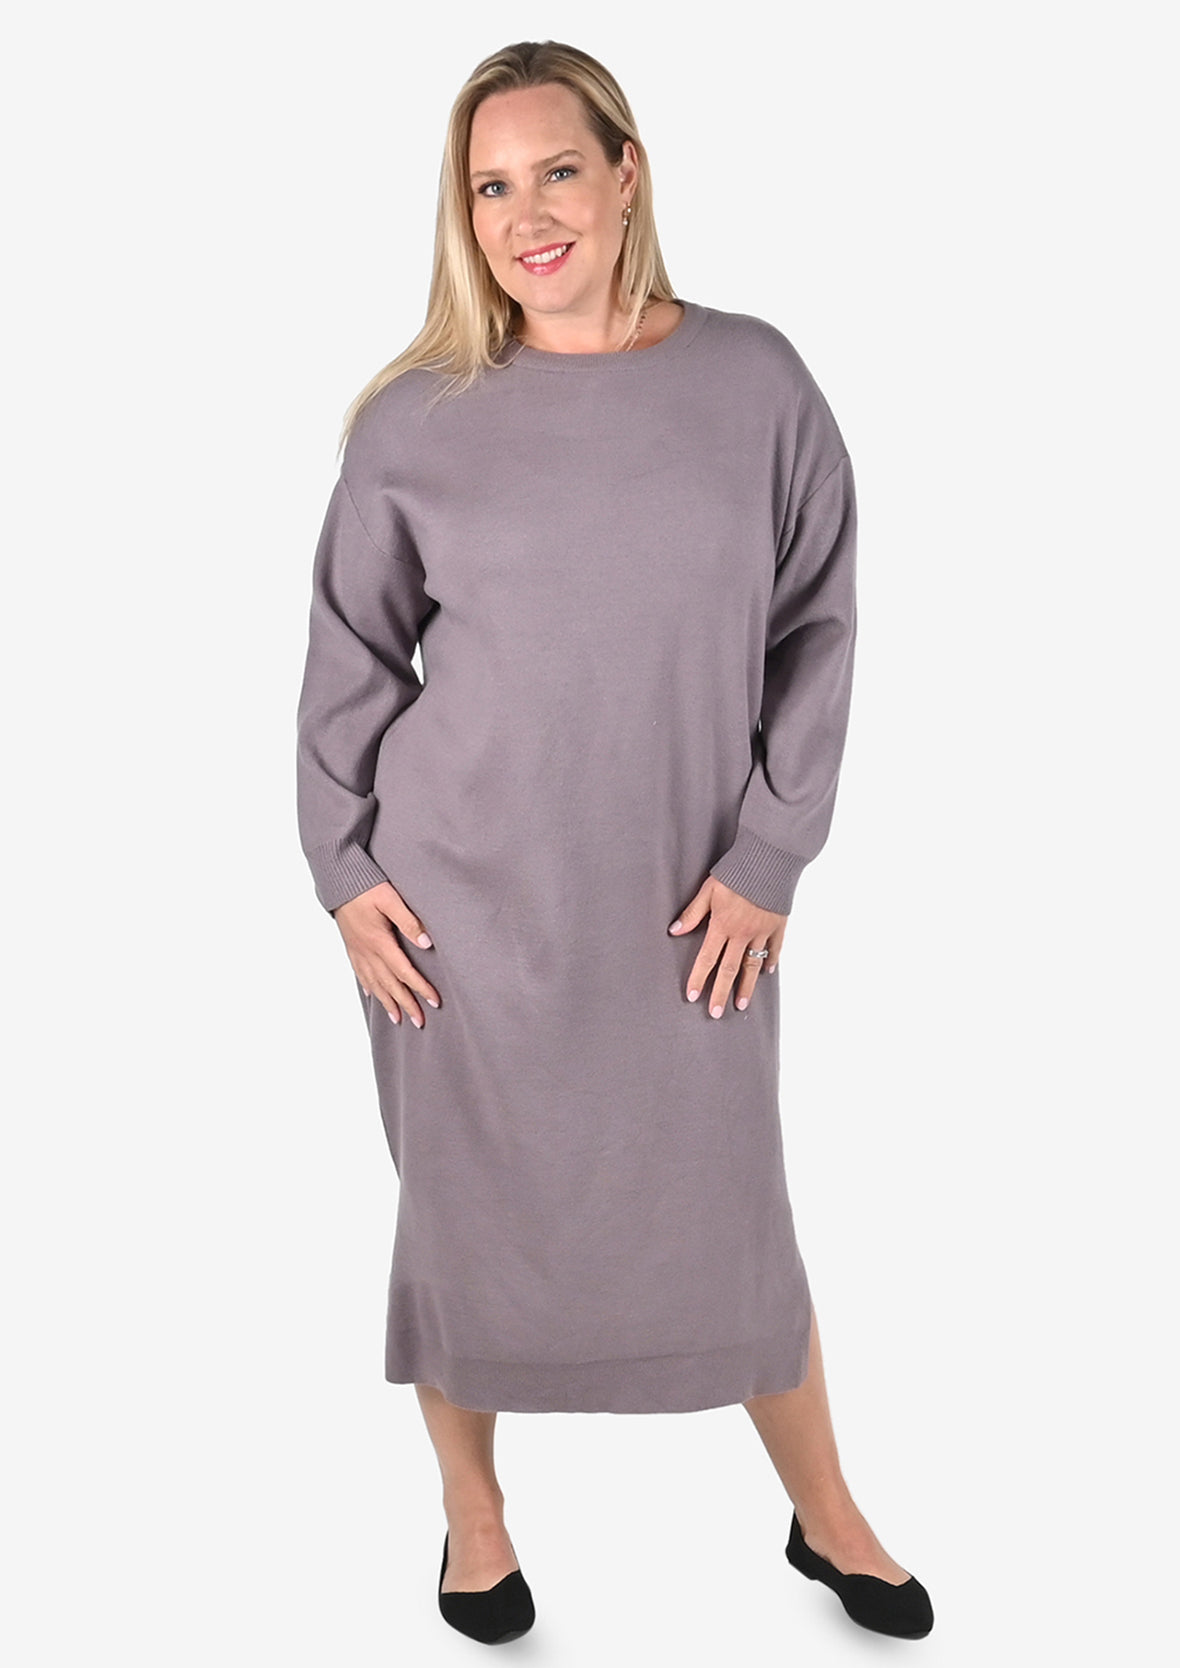 crew neck knit lilac sweater dress #color_Lilac